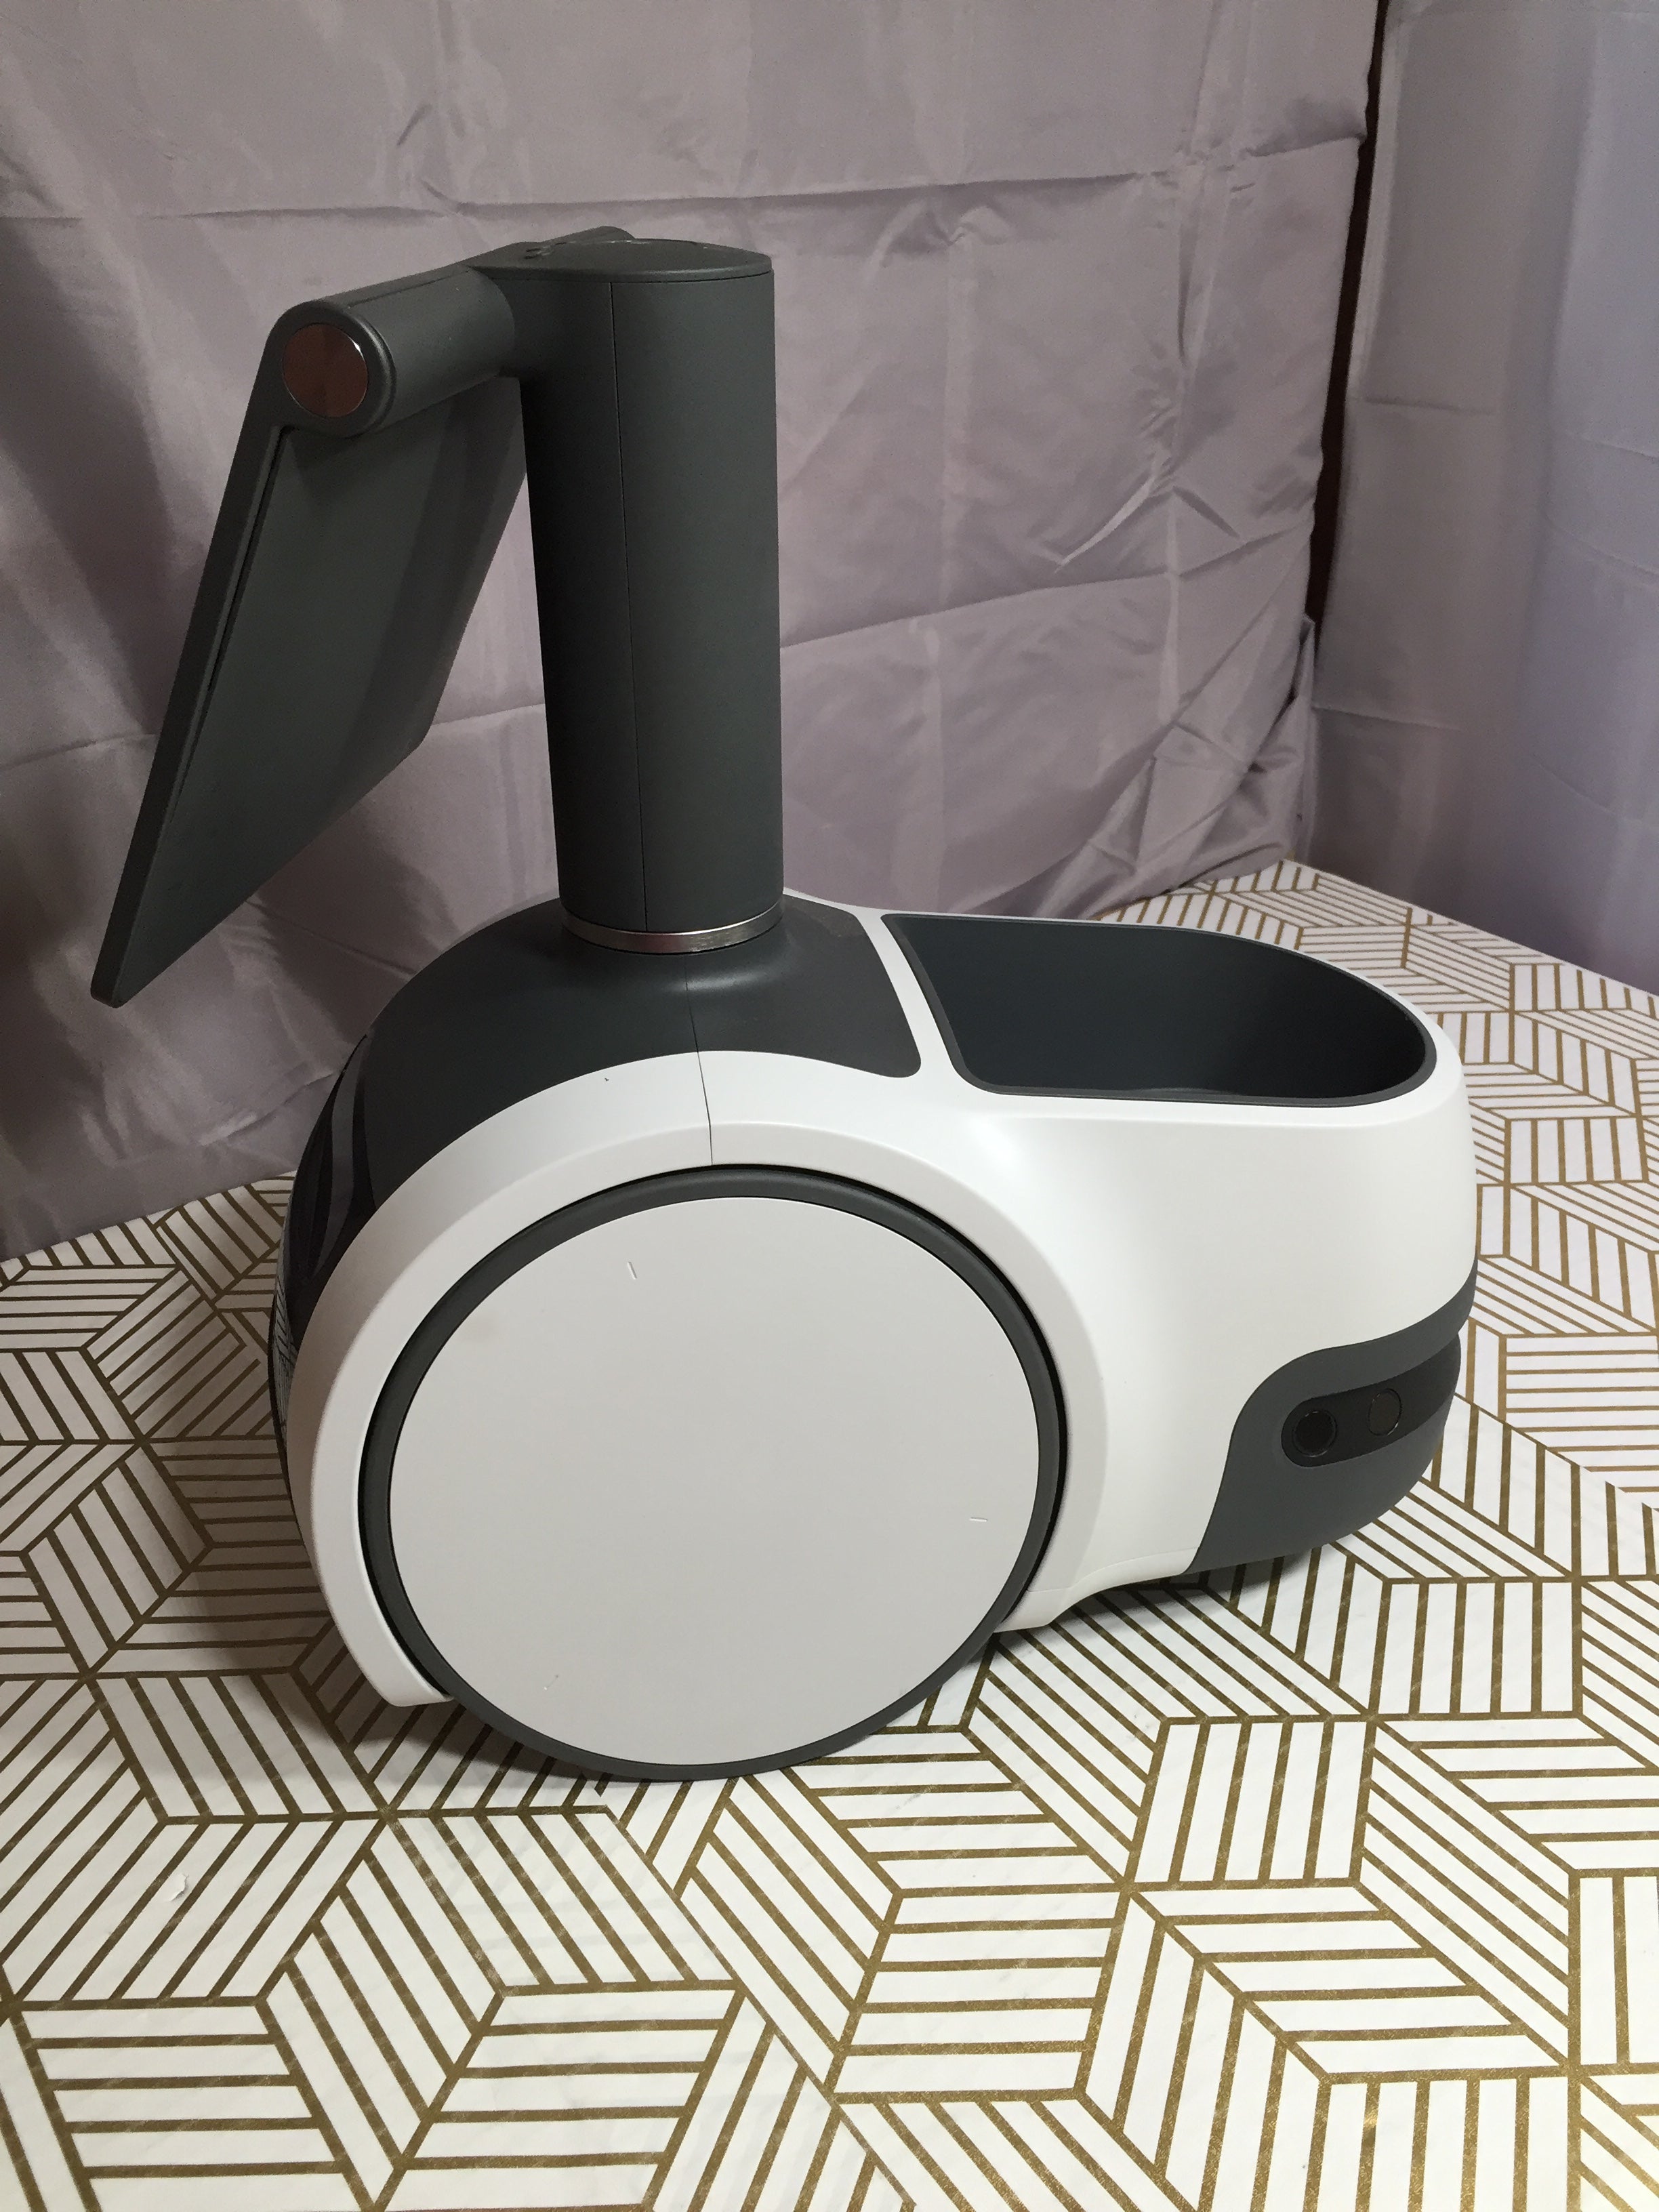   Astro, Household robot for home monitoring